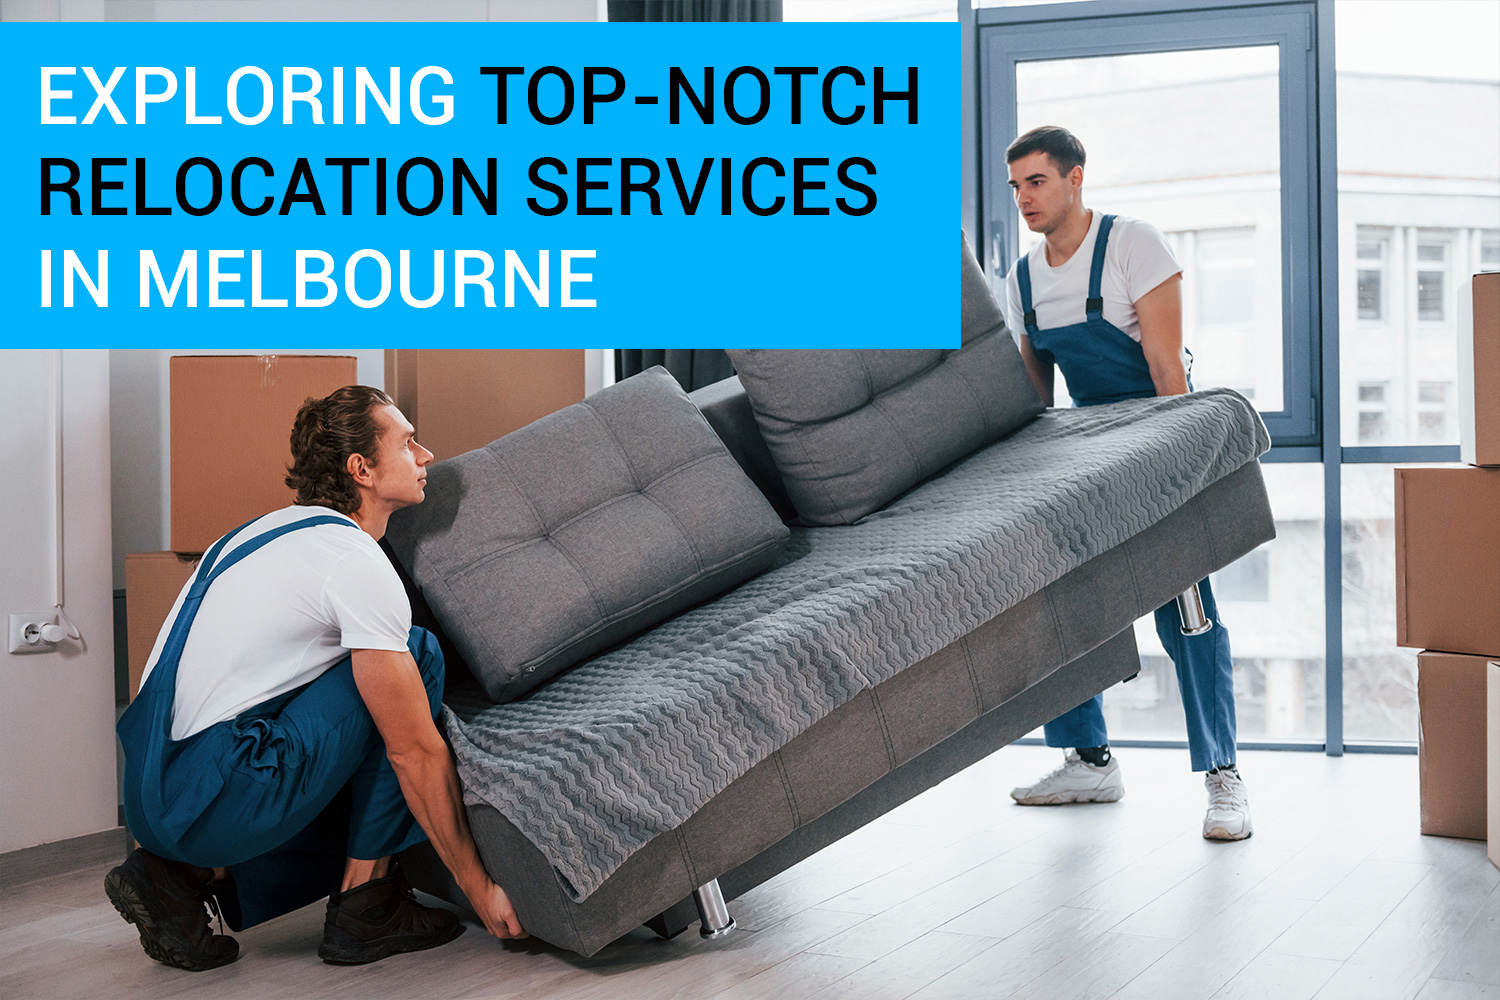 Exploring Top-Notch Relocation Services in Melbourne